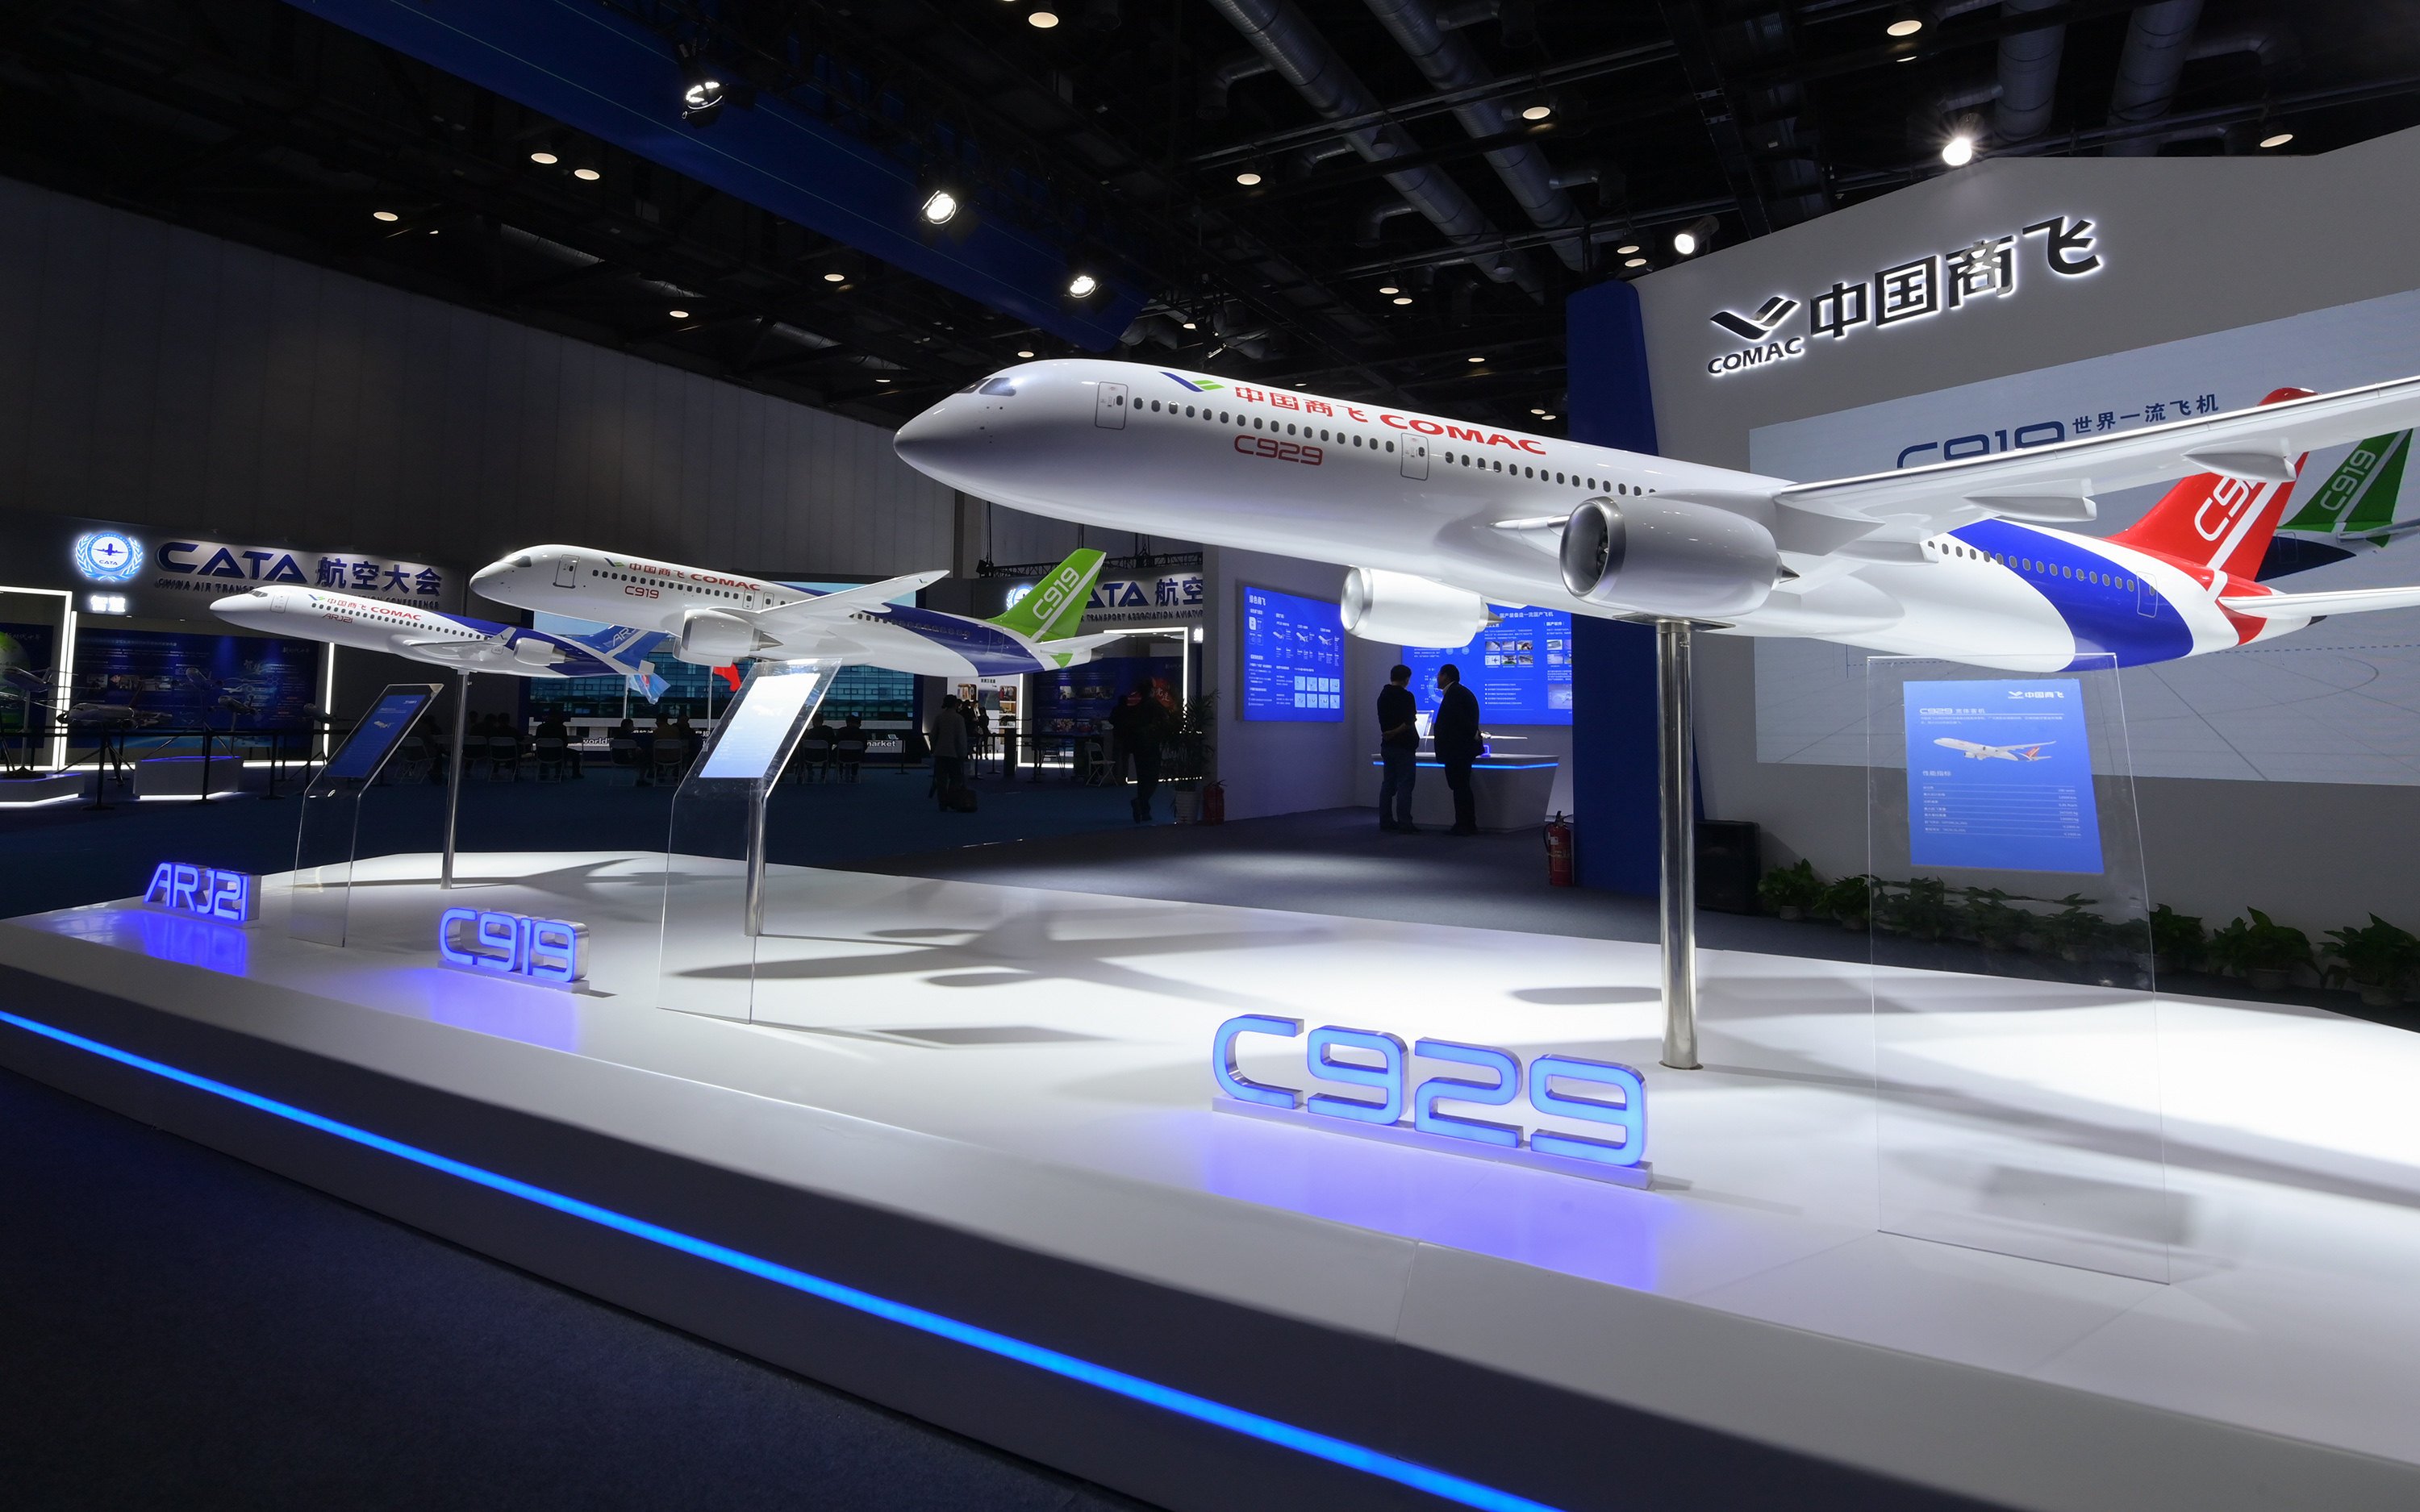 Media reports suggest Russia’s United Aircraft Corporation has dropped out of a partnership with Chinese planemaker Comac to develop a widebody passenger jet. Photo: XinHua